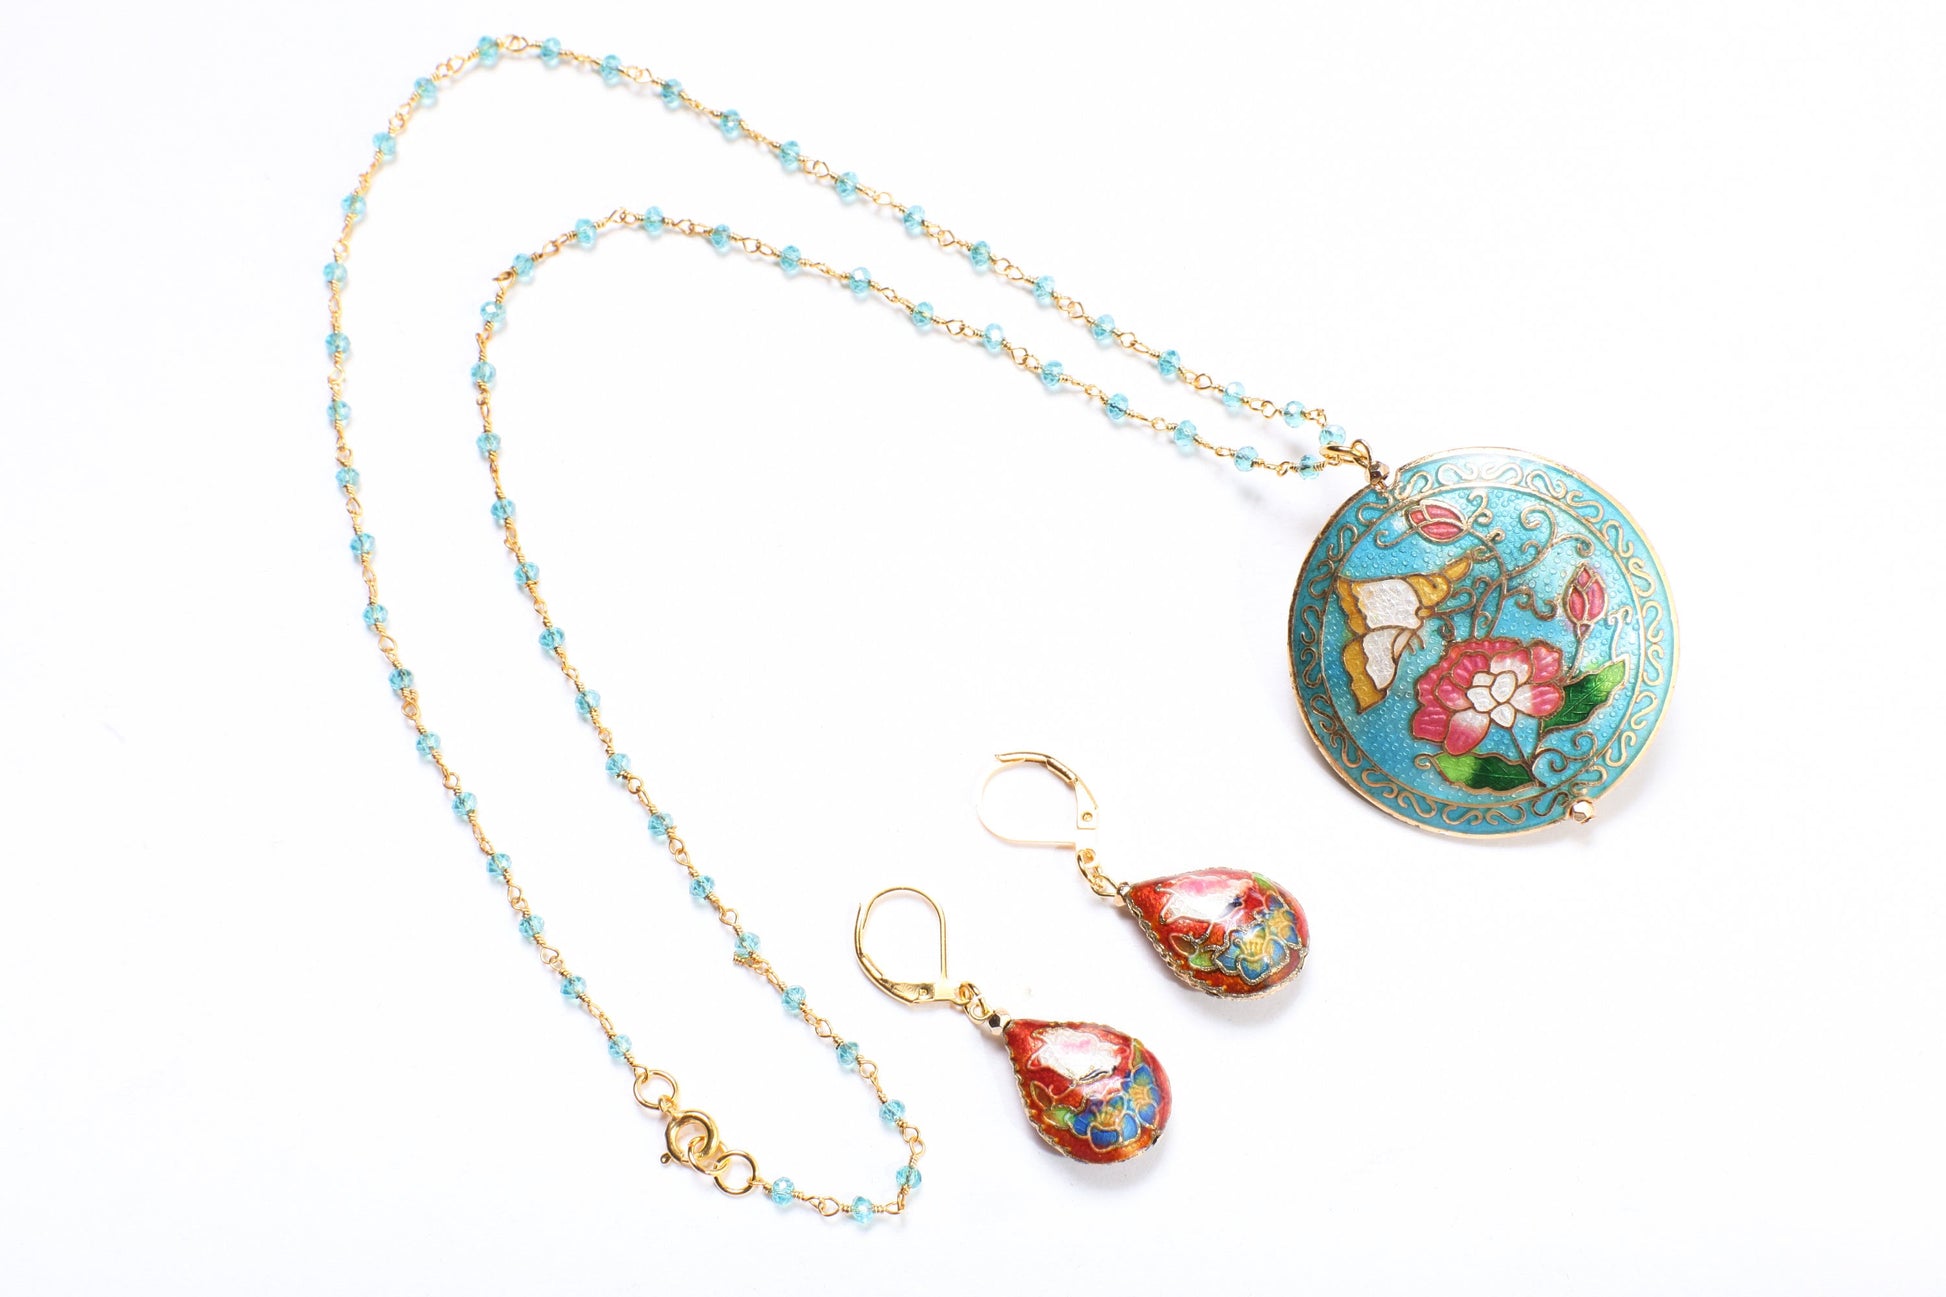 Traditional Cloisonné Pendant Vintage Floral Flowers Pink Revisable Focal with Beaded Chain Necklace 20" and matching Earrings set